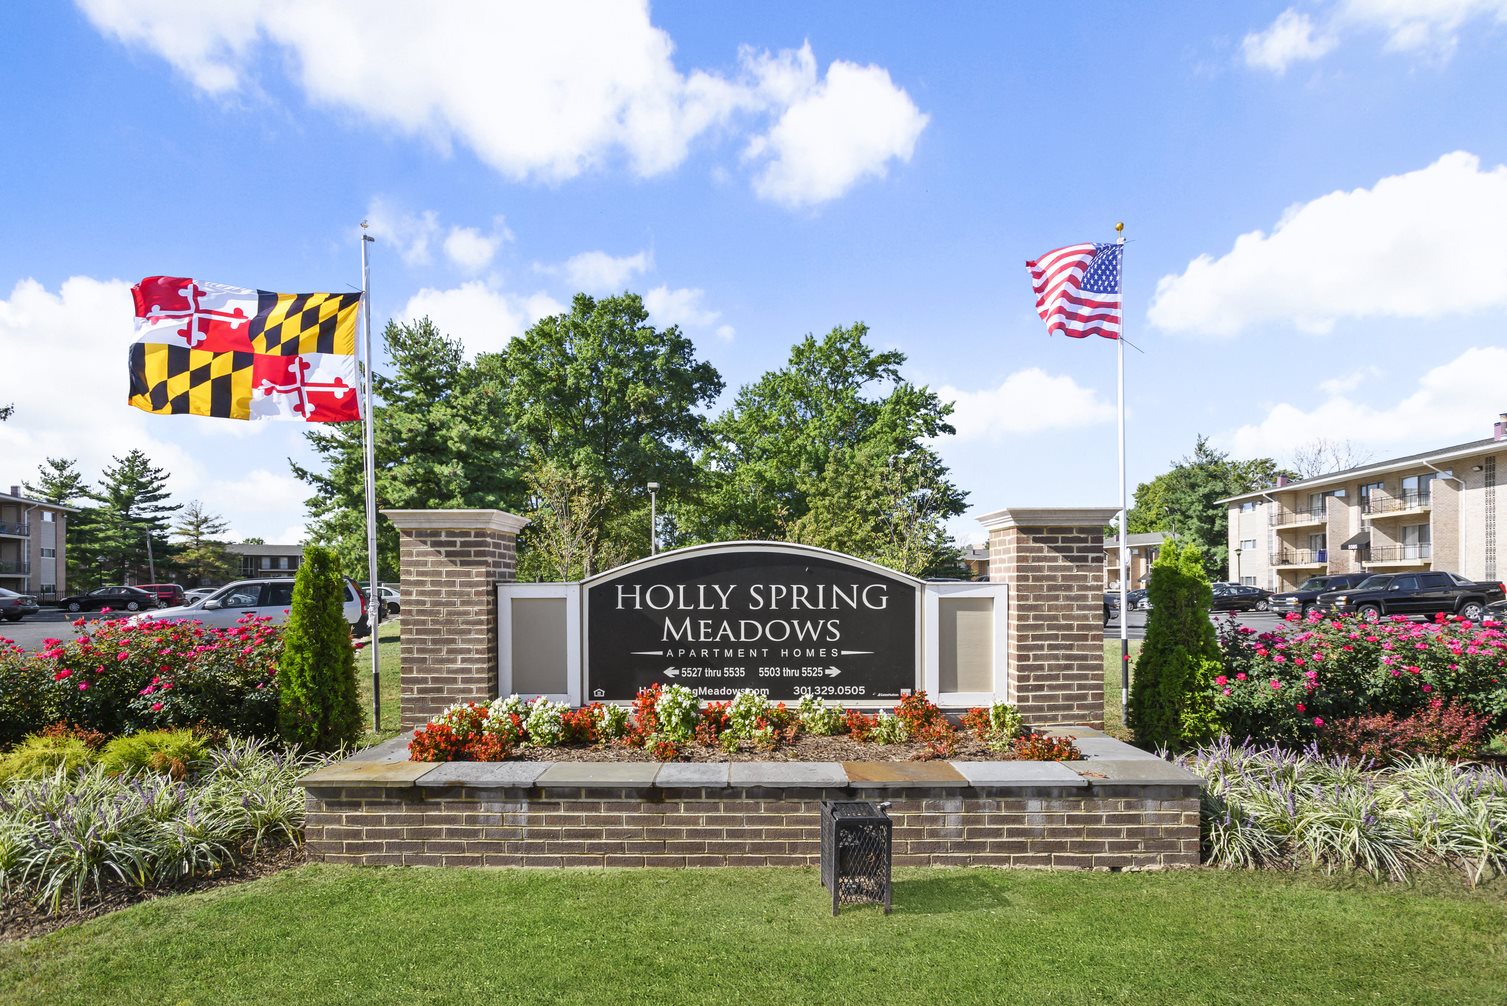 Holly Spring Meadows Apartments in Forestville, MD